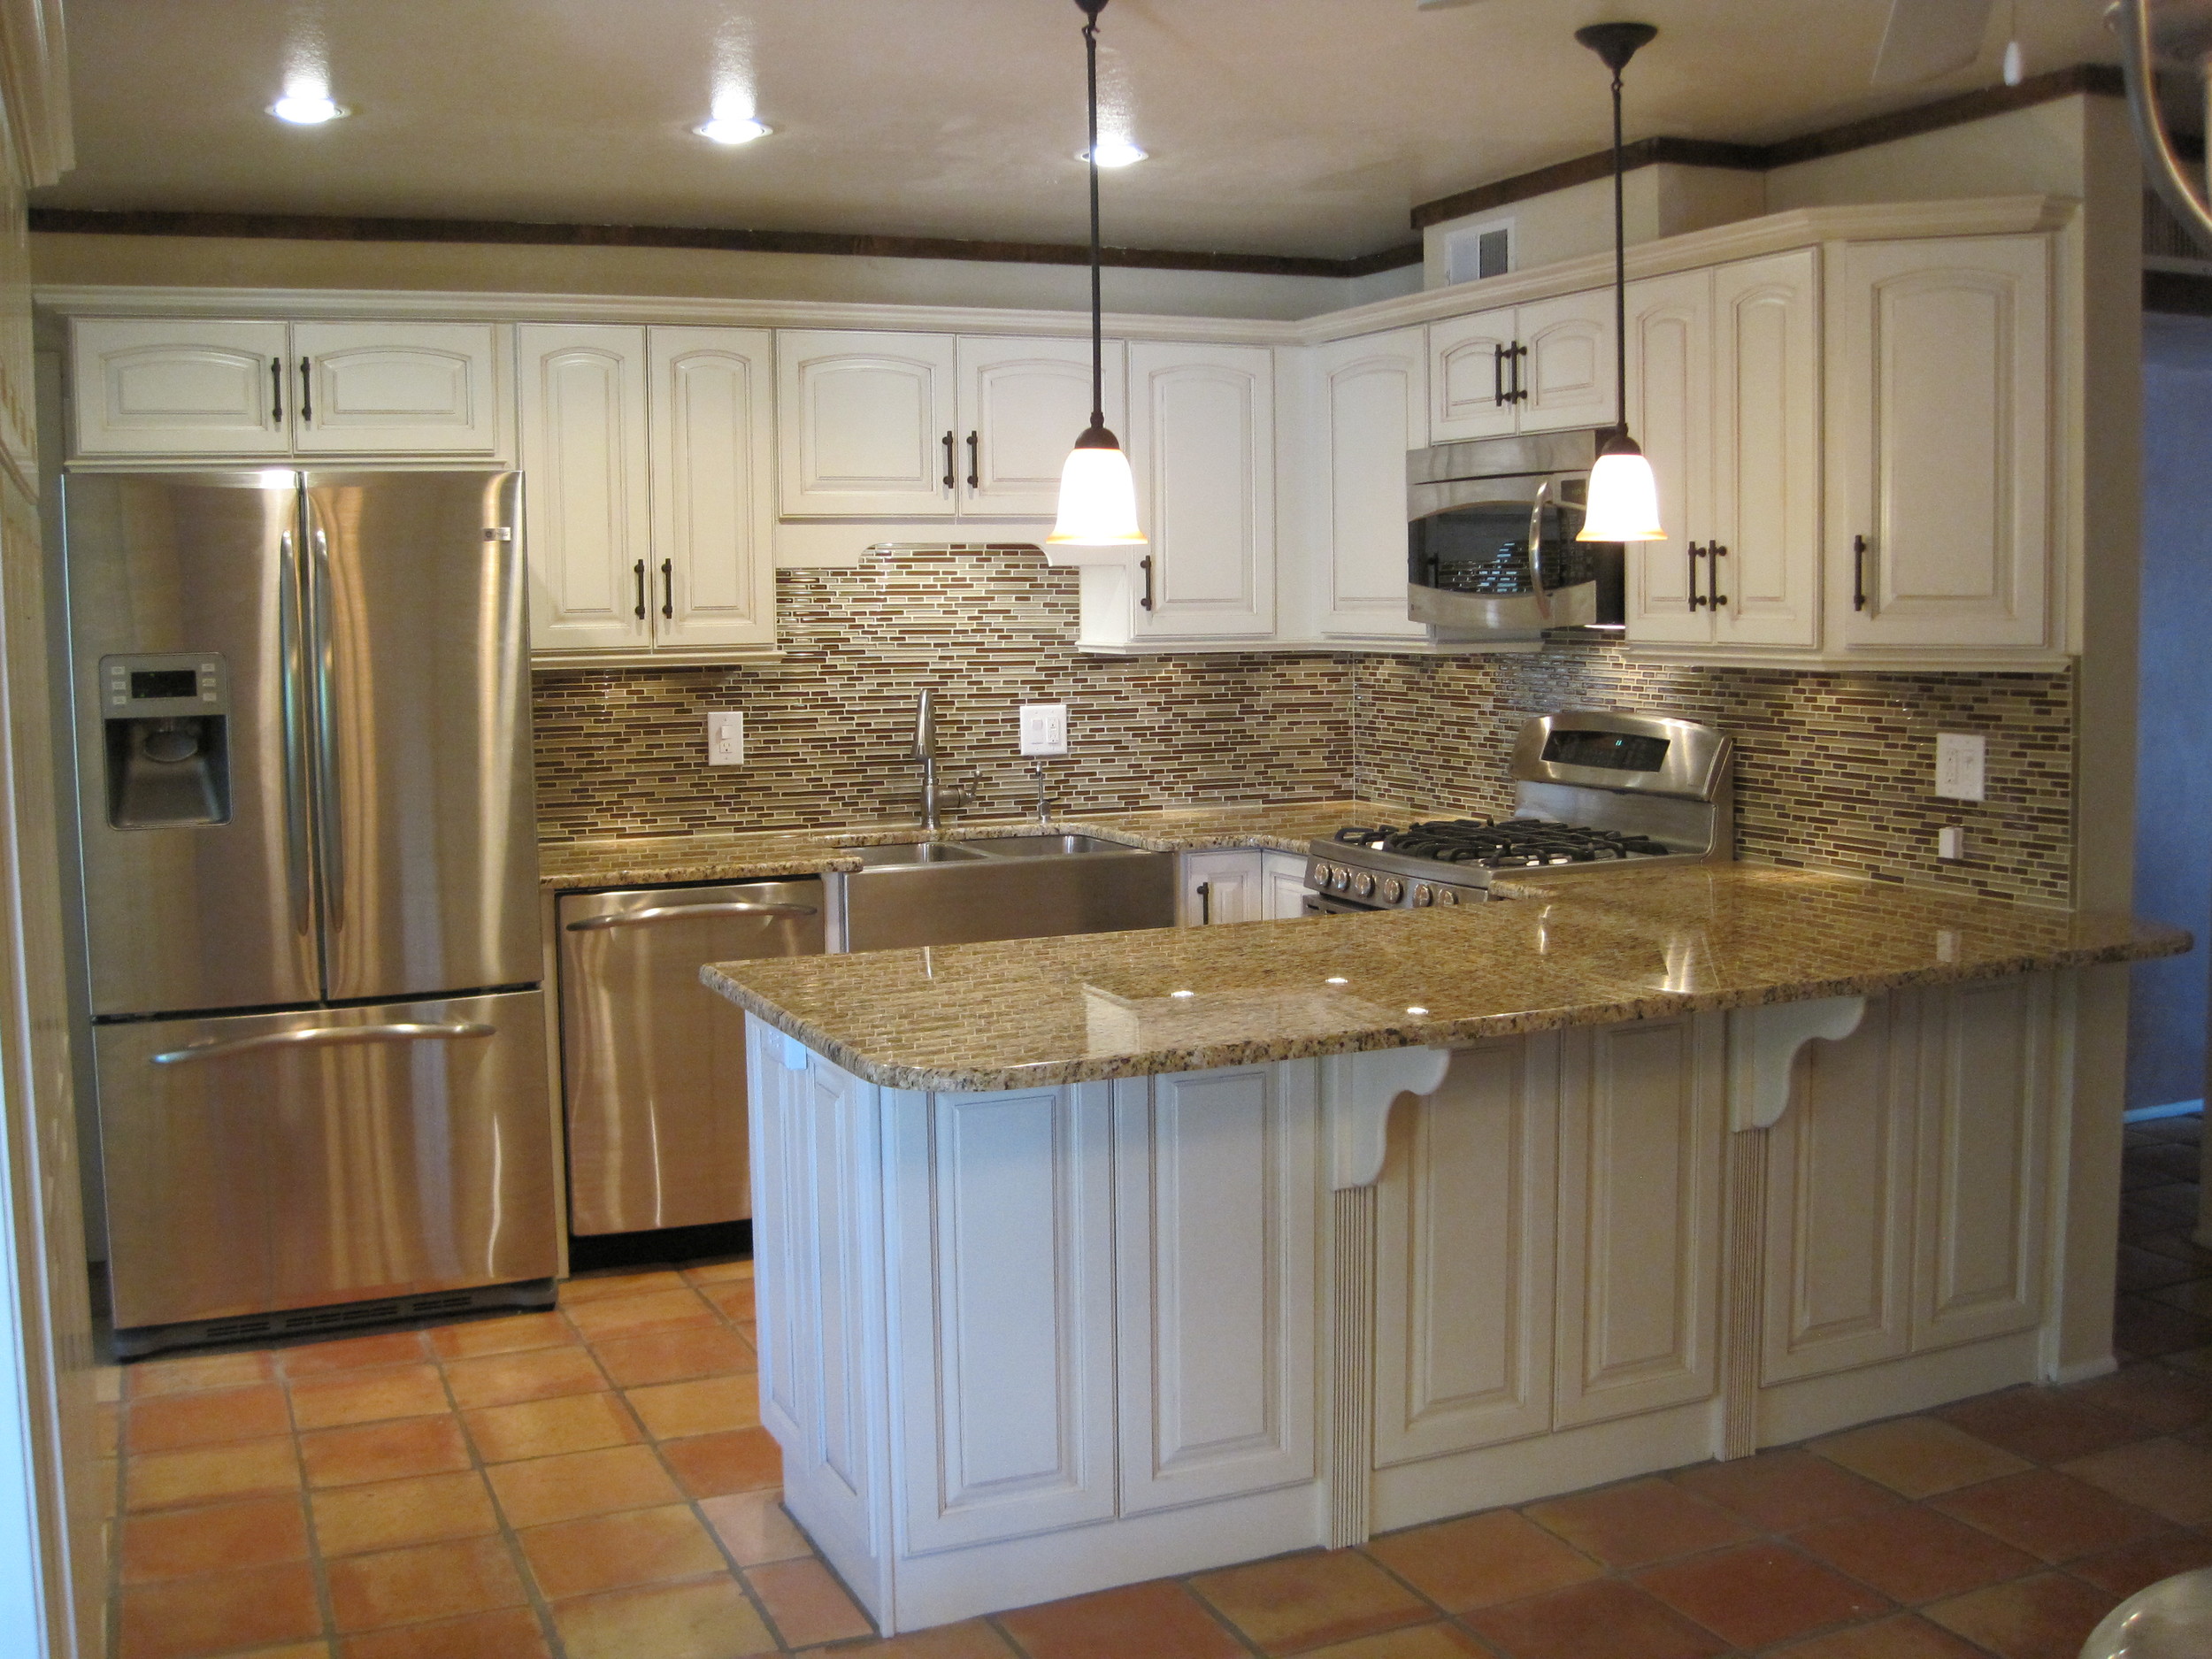 Projects Fix Phx Remodeling Repair Services